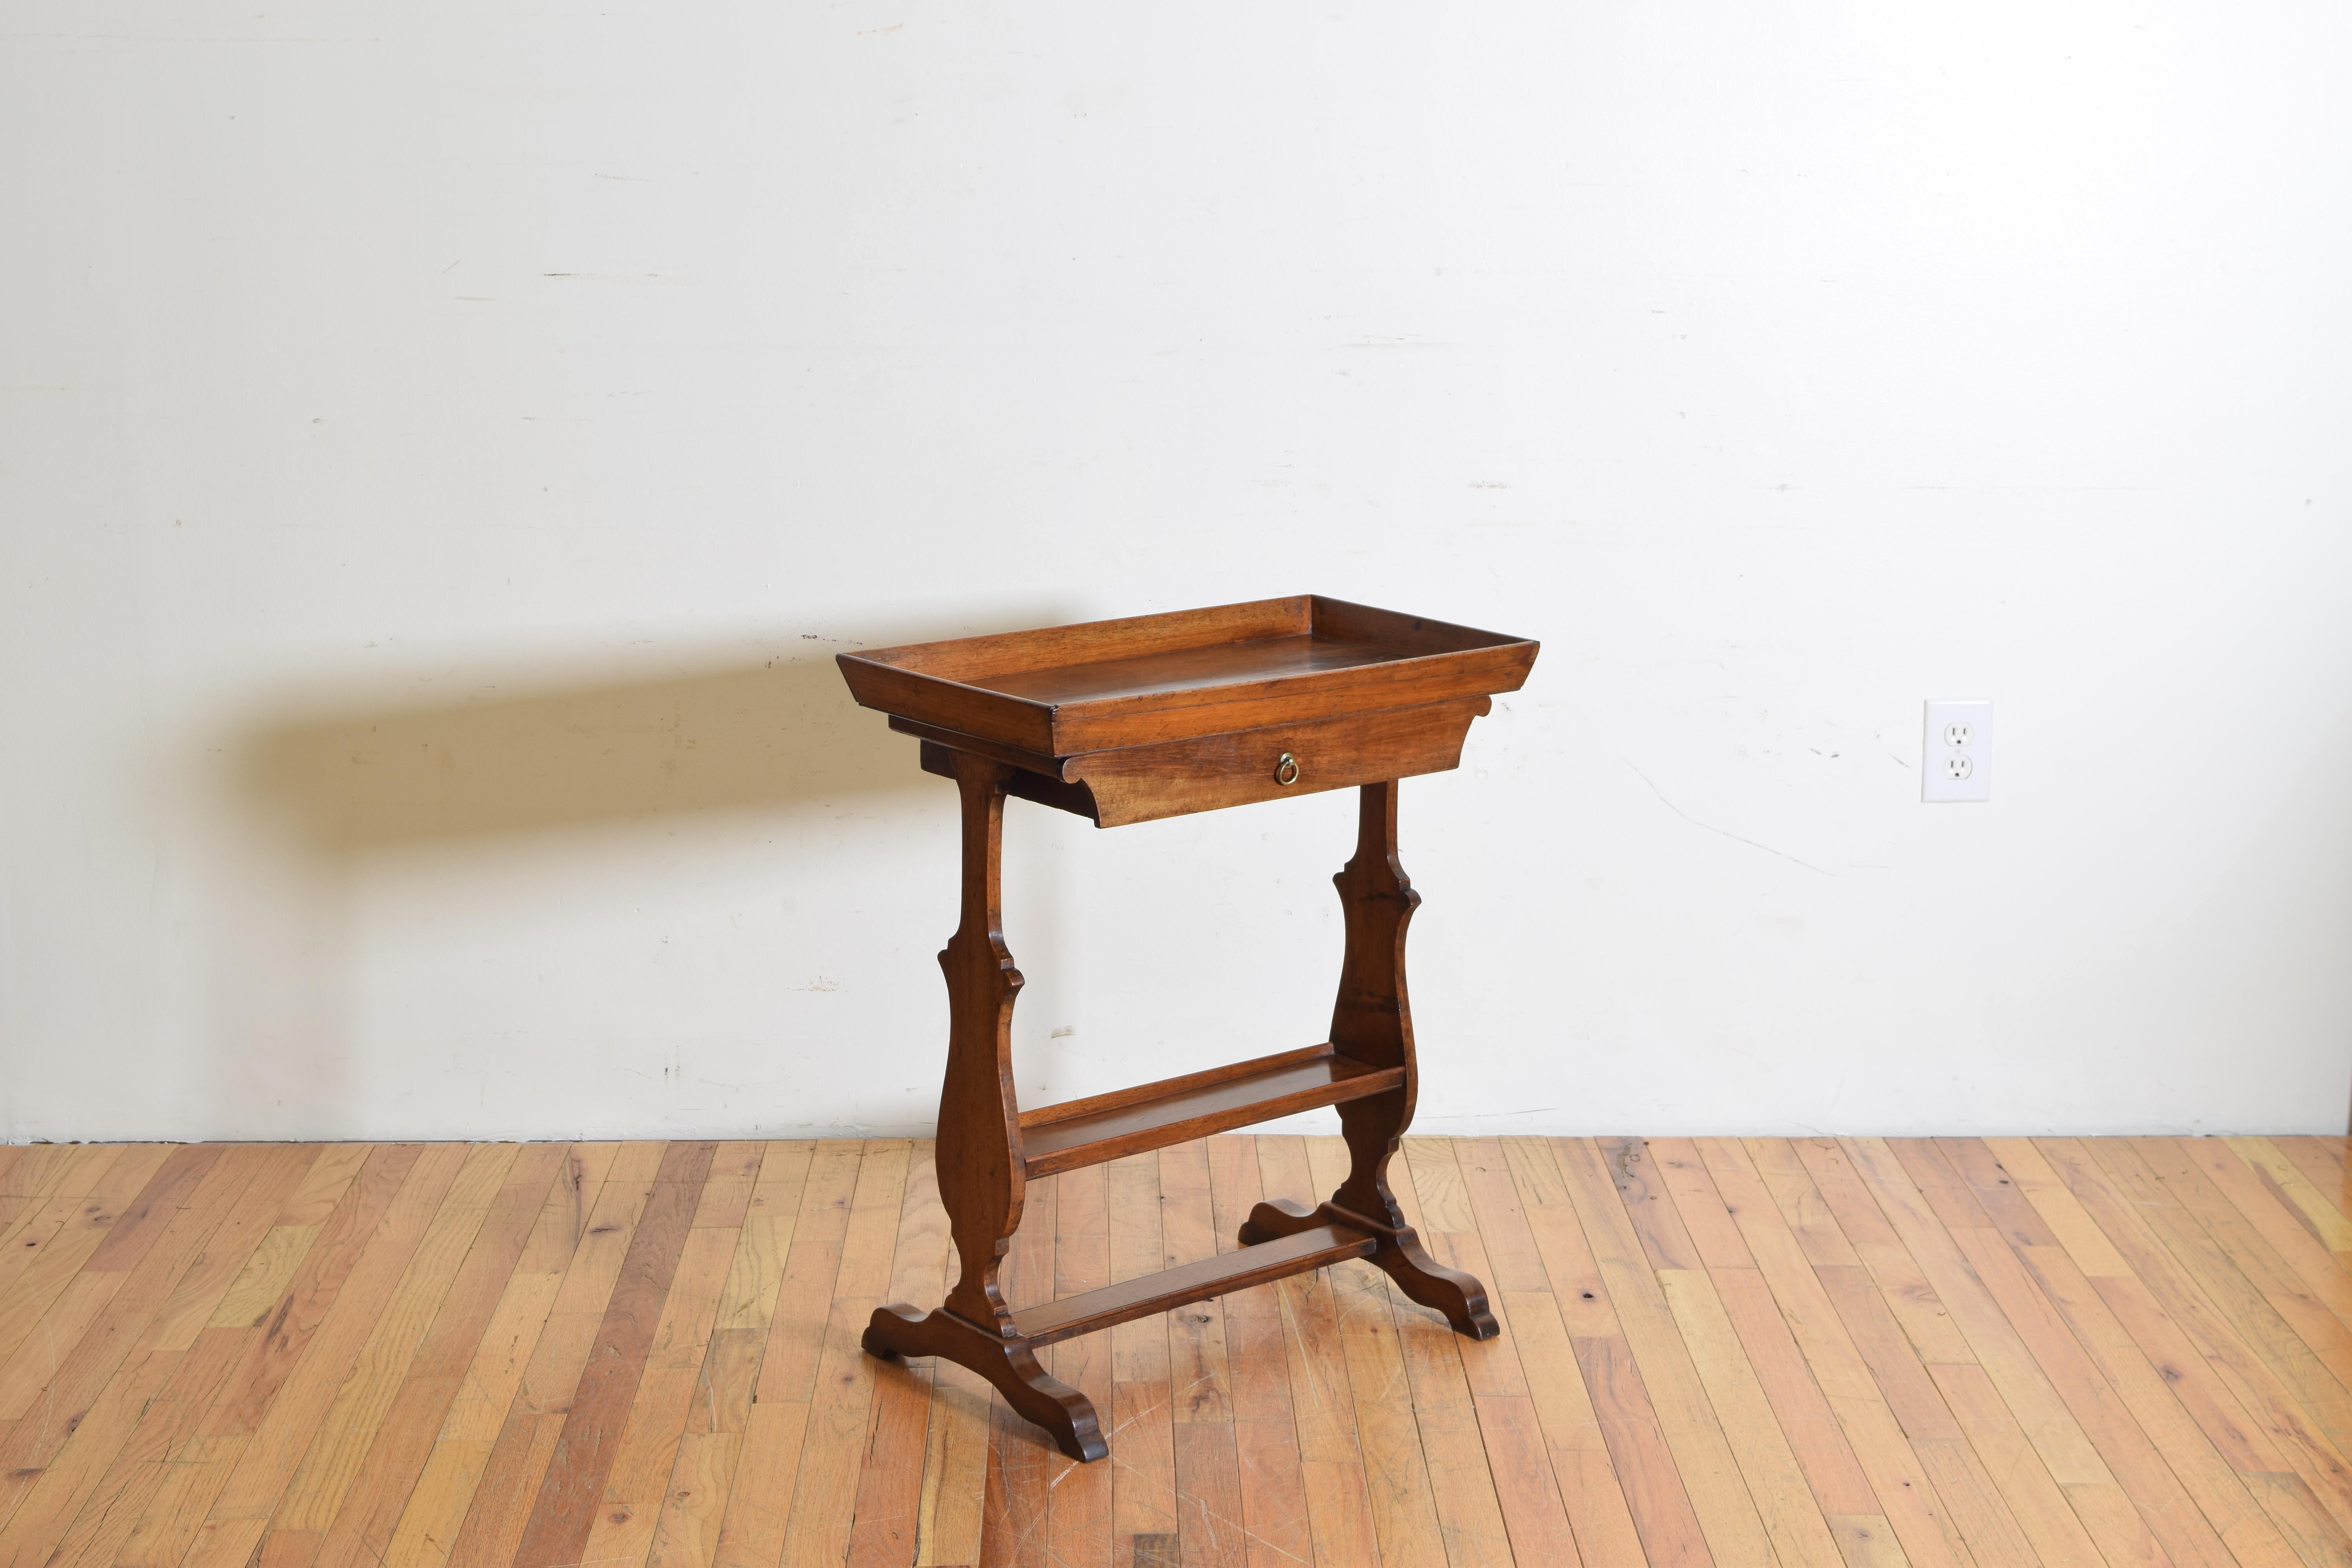 having a deep tray top above a single drawer, the shaped trestle legs joined by a centered tray with a small gallery edge, the bracket feet joined by yet another flattened stretcher, second quarter of the 19th century.